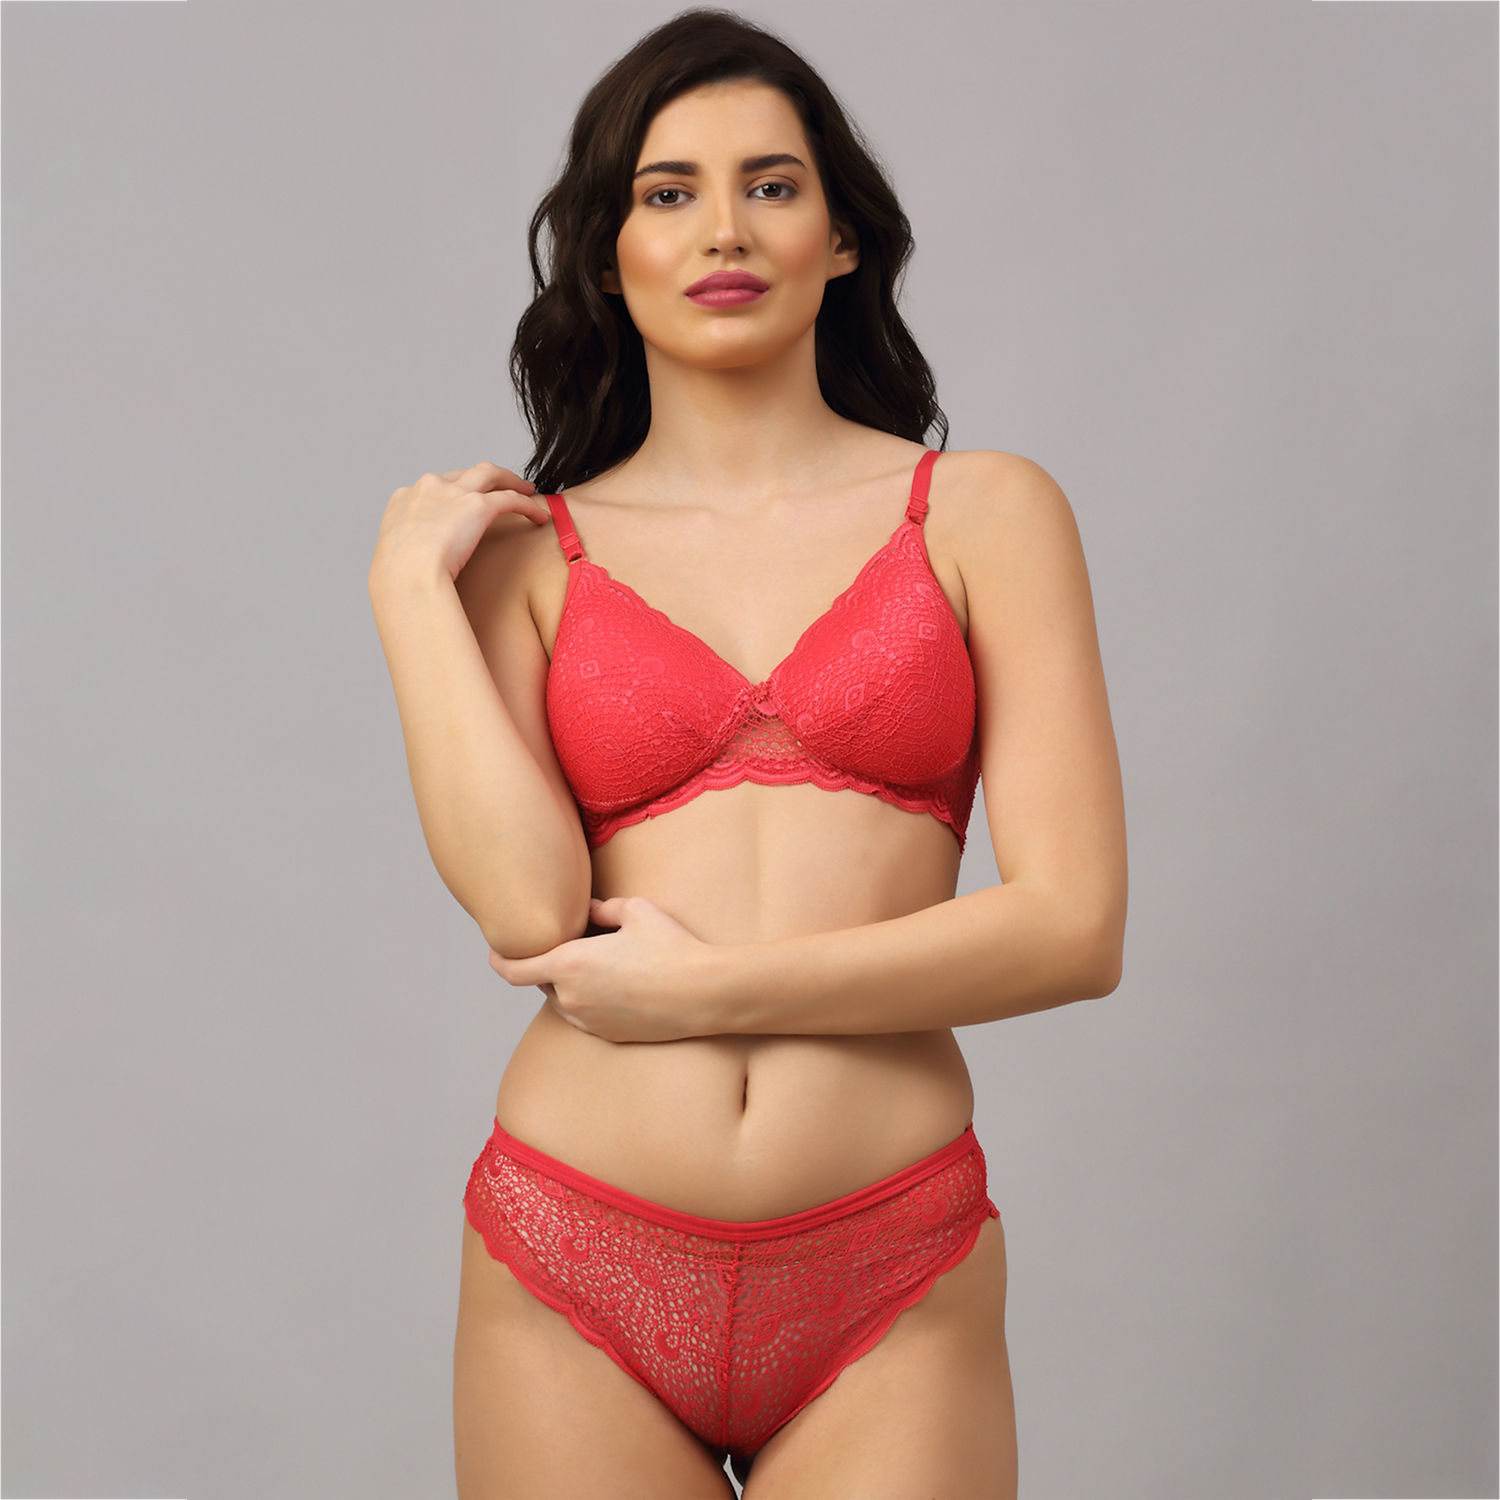 Buy Quttos PrettyCat Padded Lace Tshirt Bra Panty Set Pink at